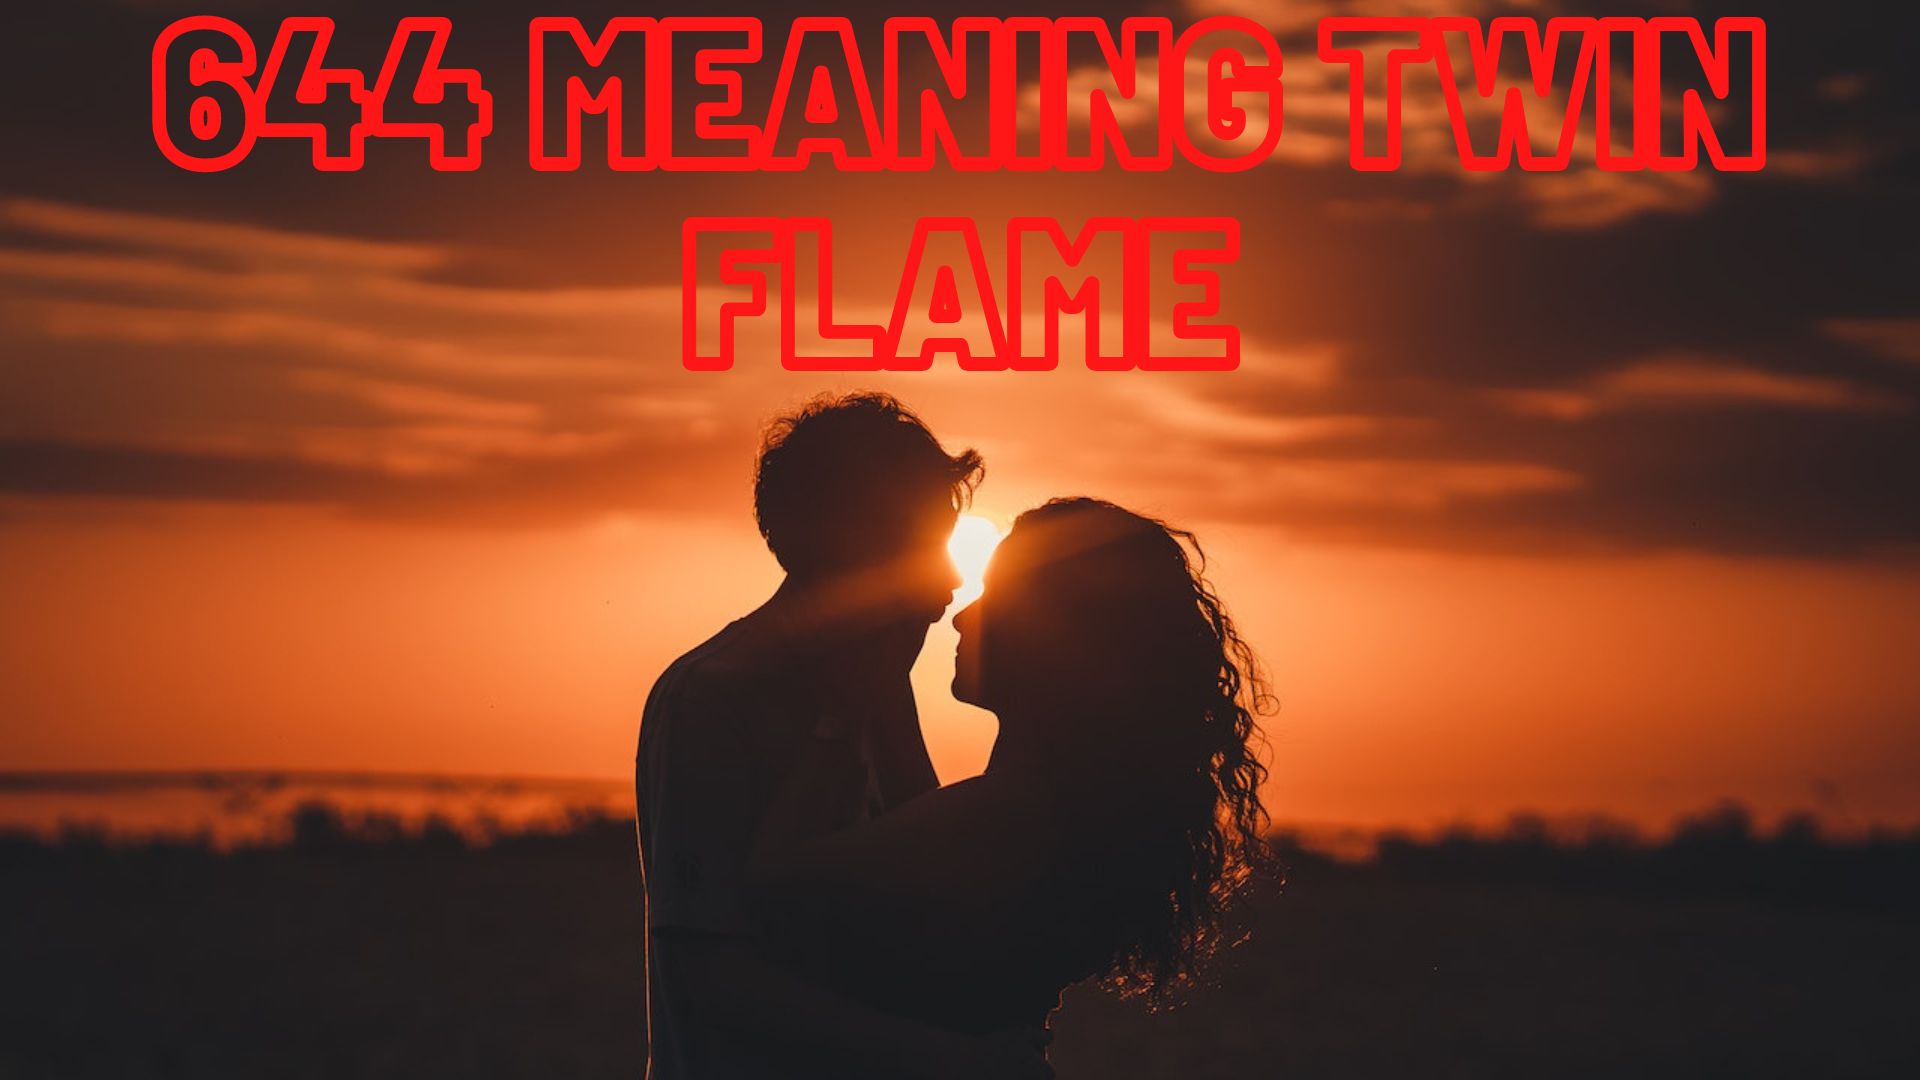 644 Meaning Twin Flame - Represents Career And Finance